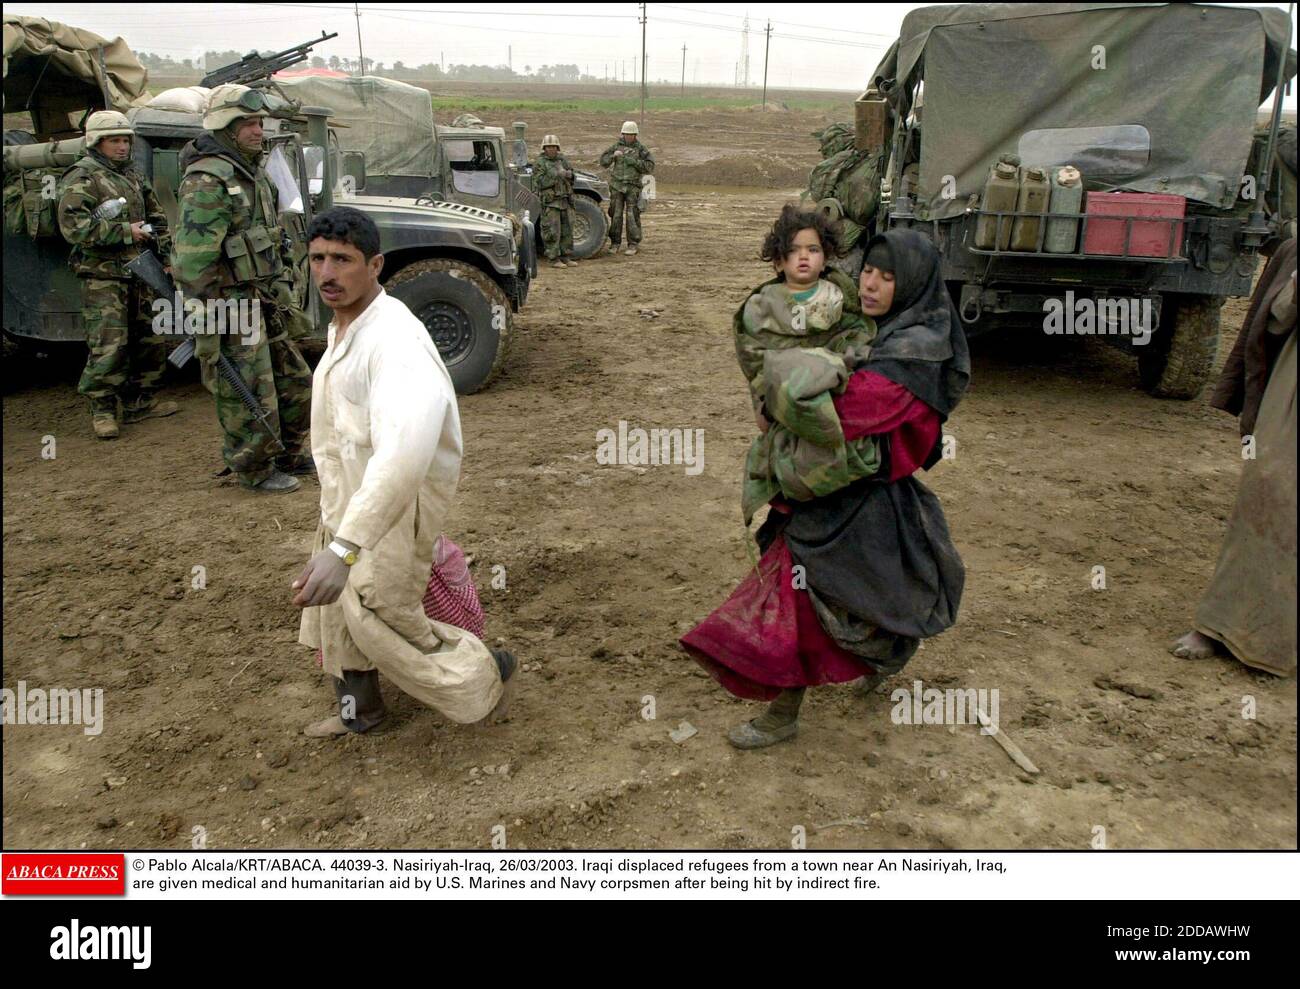 NO FILM, NO VIDEO, NO TV, NO DOCUMENTARY - © Pablo Alcala/KRT/ABACA. 44039-3. Nasiriyah-Iraq, 26/03/2003. Iraqi displaced refugees from a town near An Nasiriyah, Iraq, are given medical and humanitarian aid by U.S. Marines and Navy corpsmen after being hit by indirect fire. Stock Photo